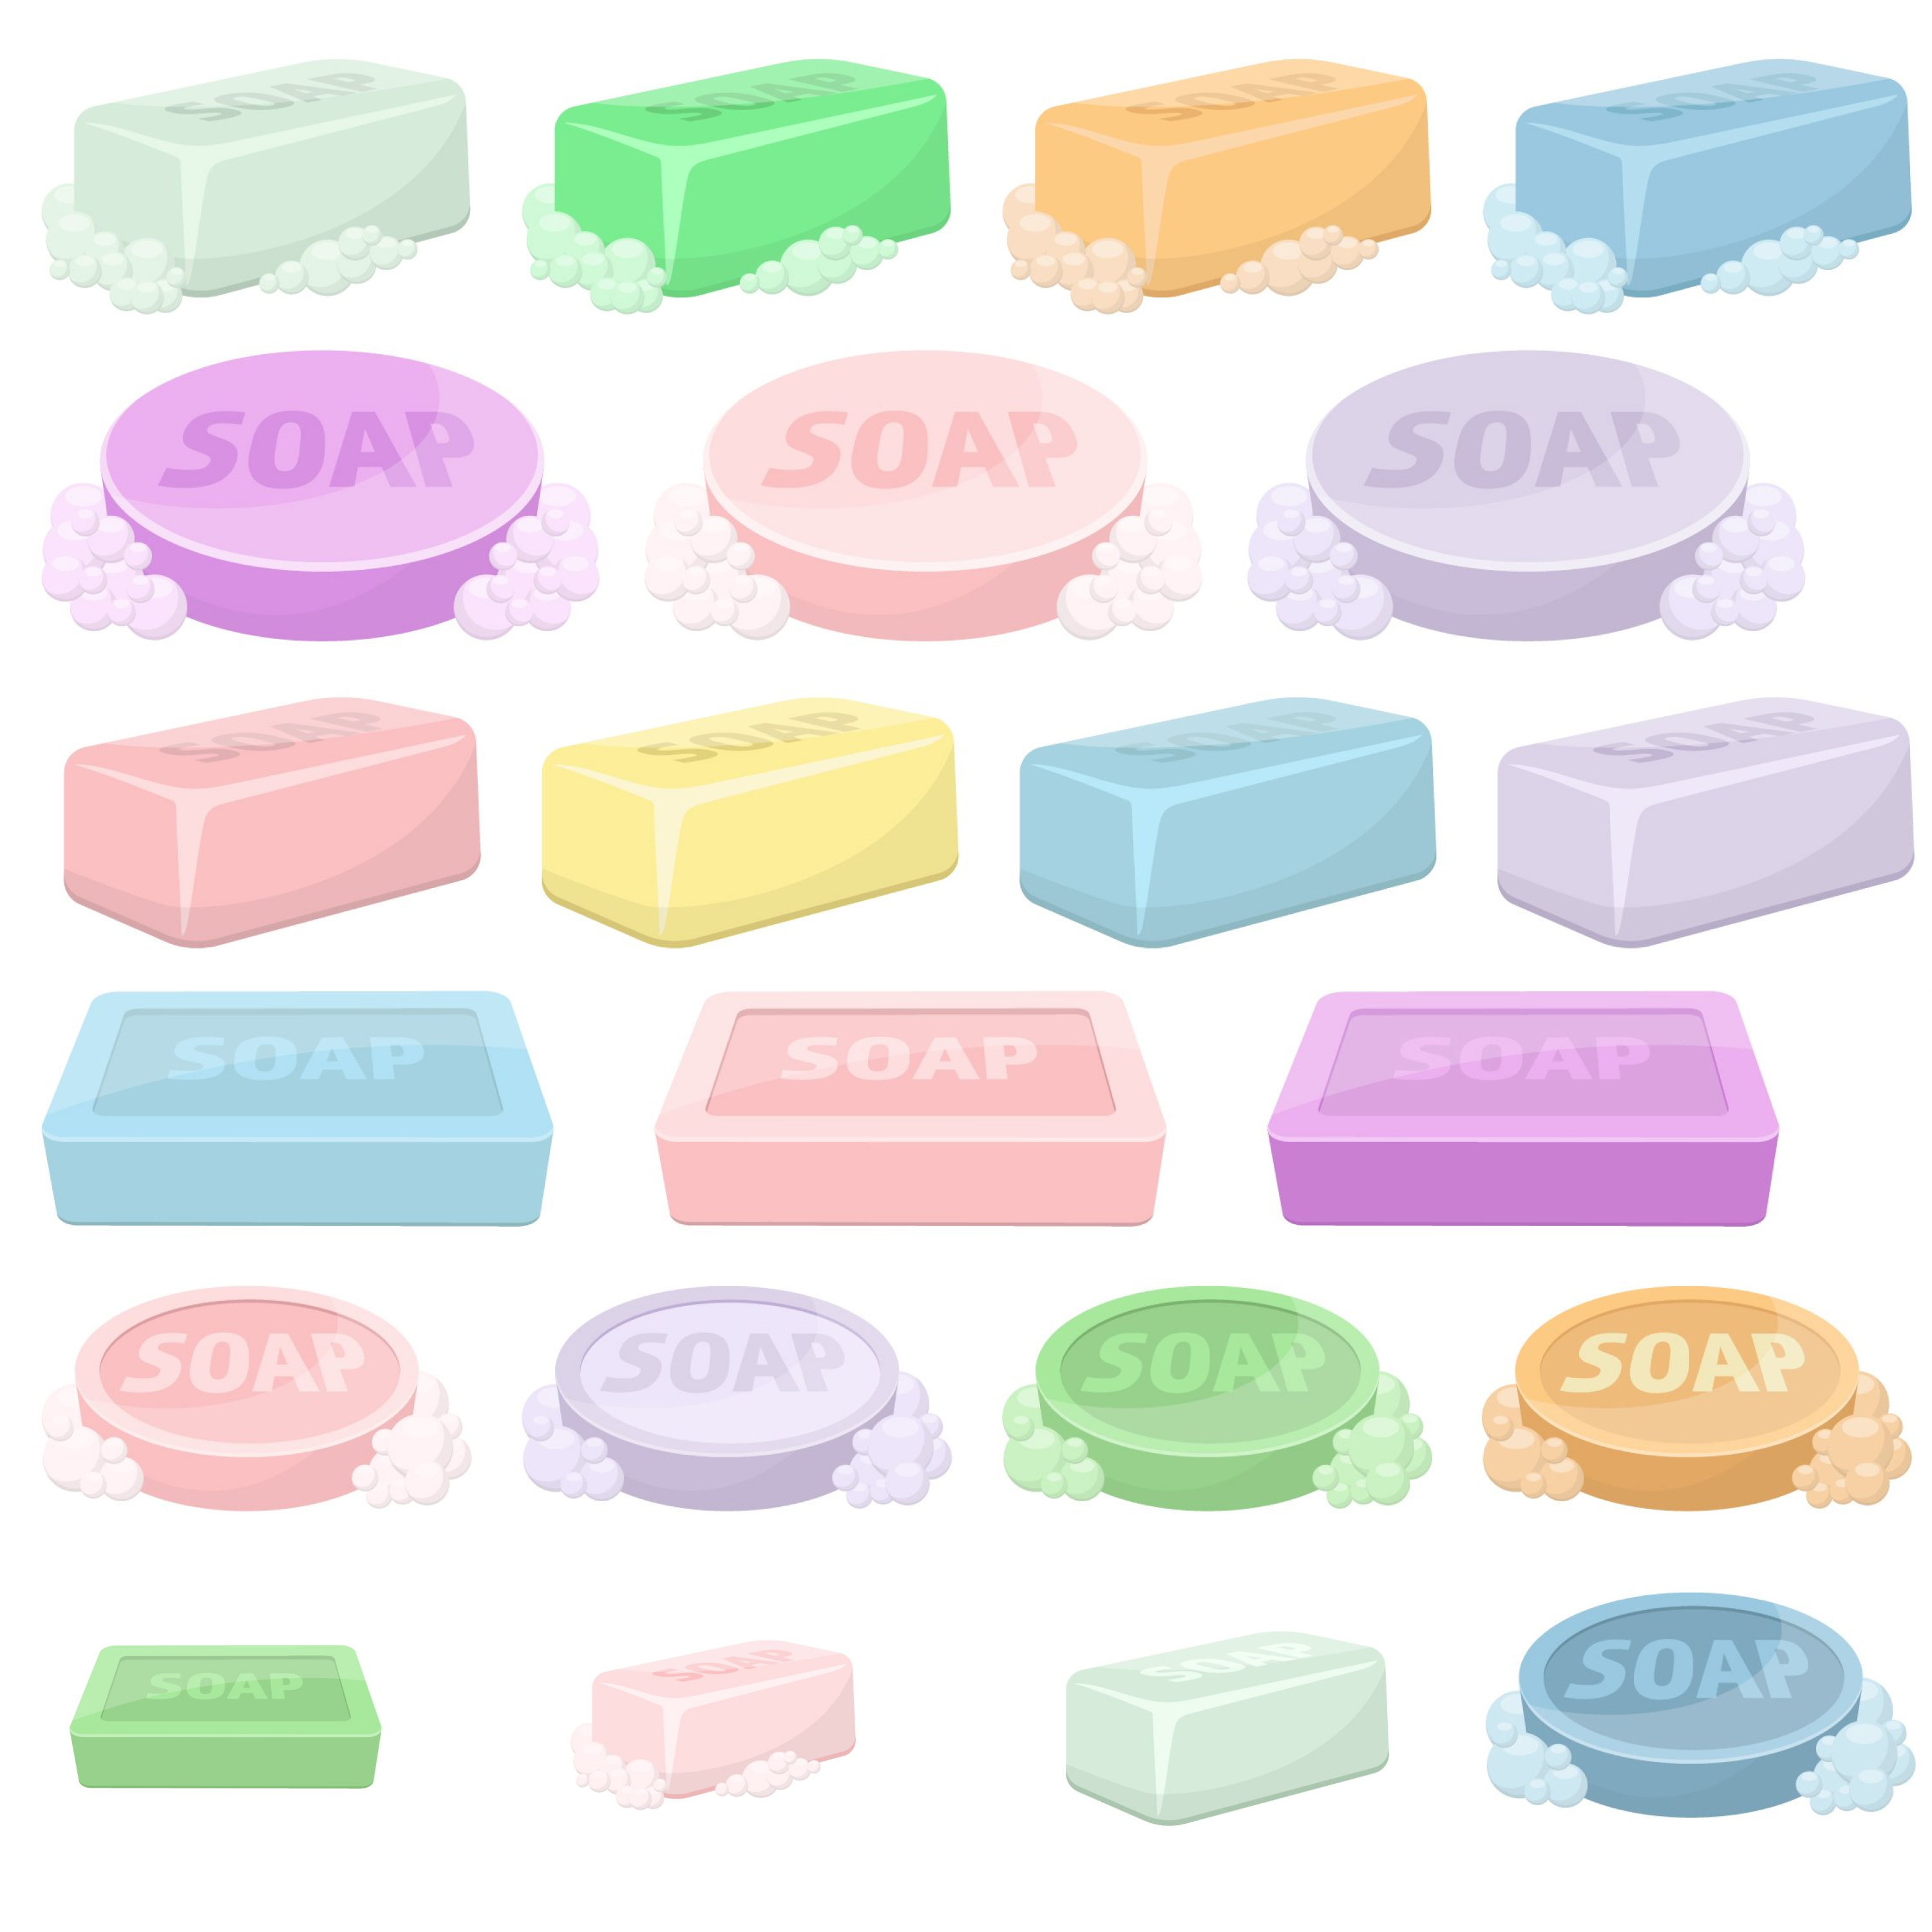 Preview solid soap for washing clipart vector design illustration.